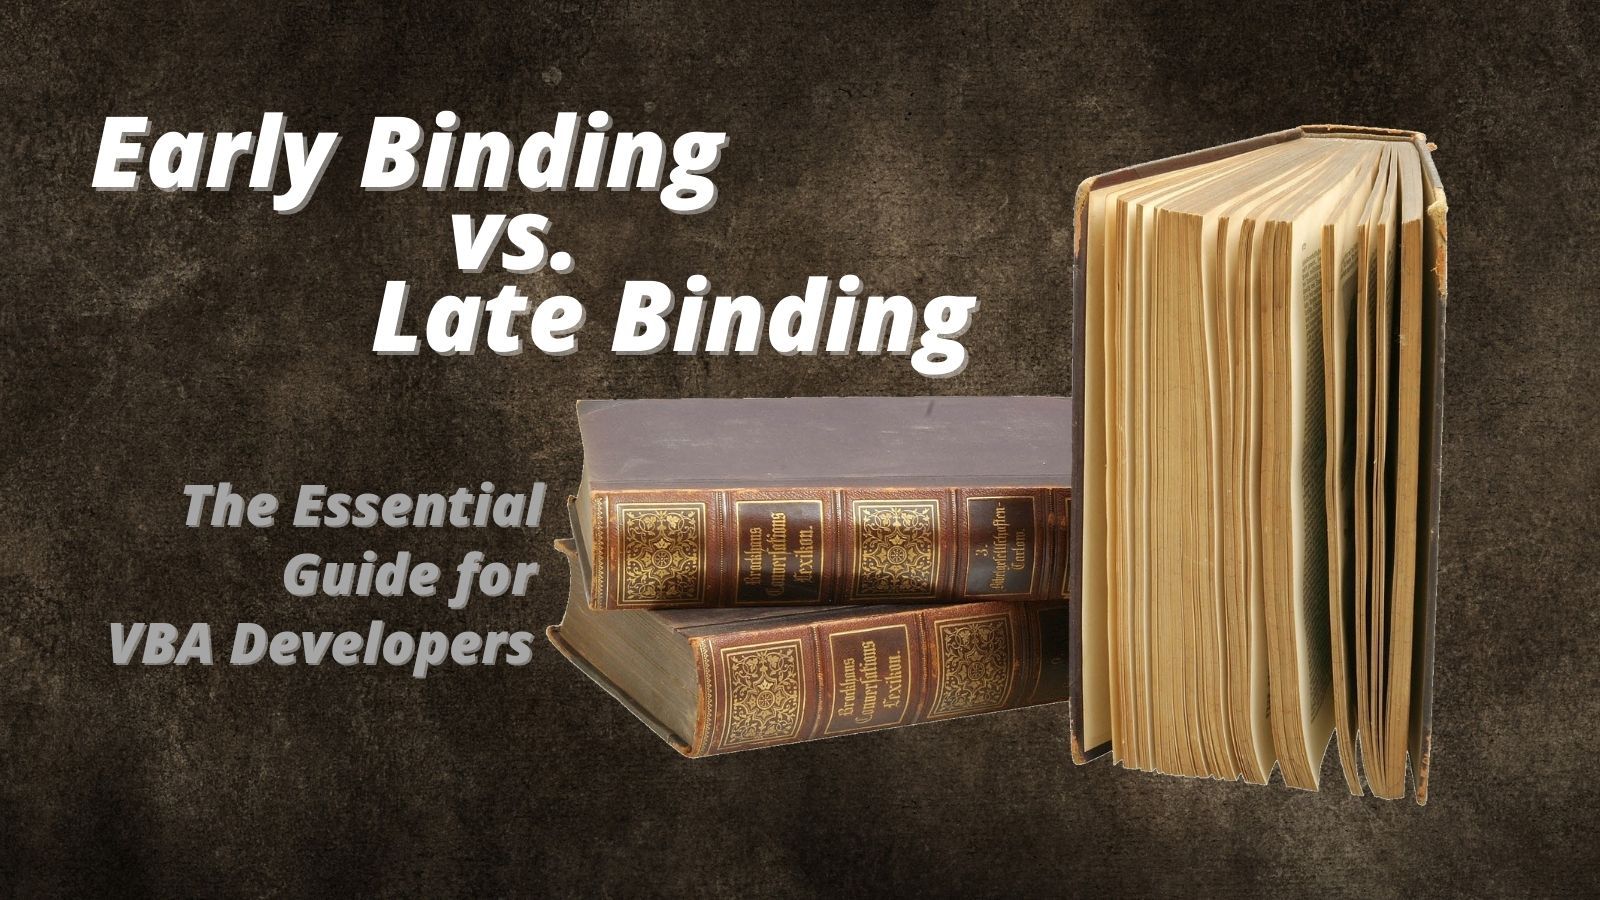 Early Binding vs. Late Binding: The Essential Guide for VBA Developers